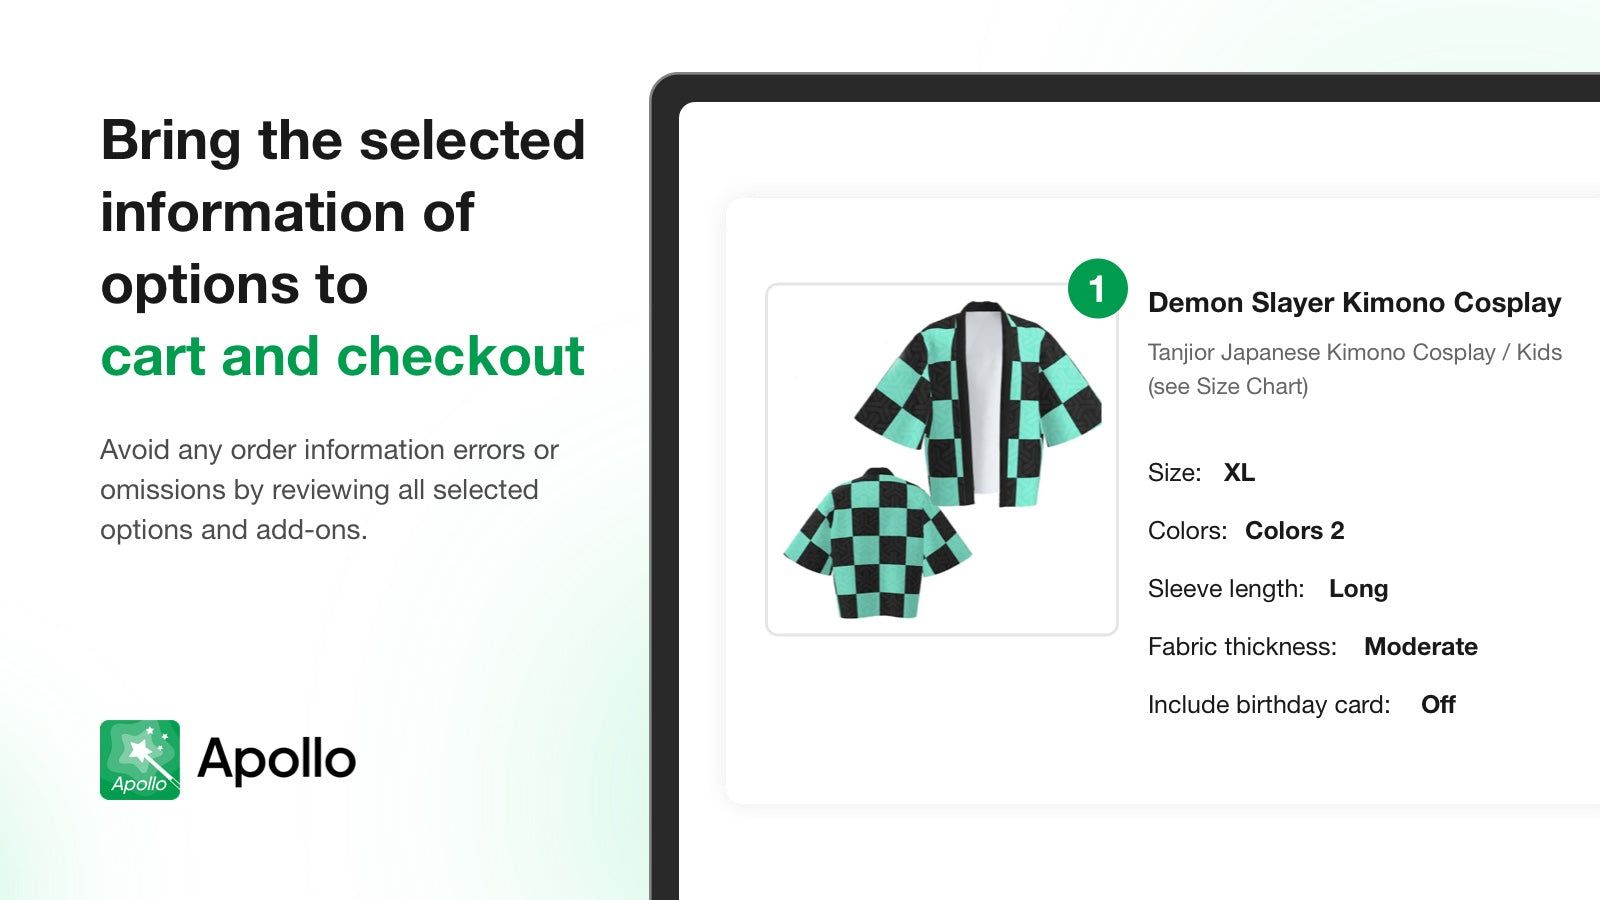 Bring the selected information of options to cart and checkout.